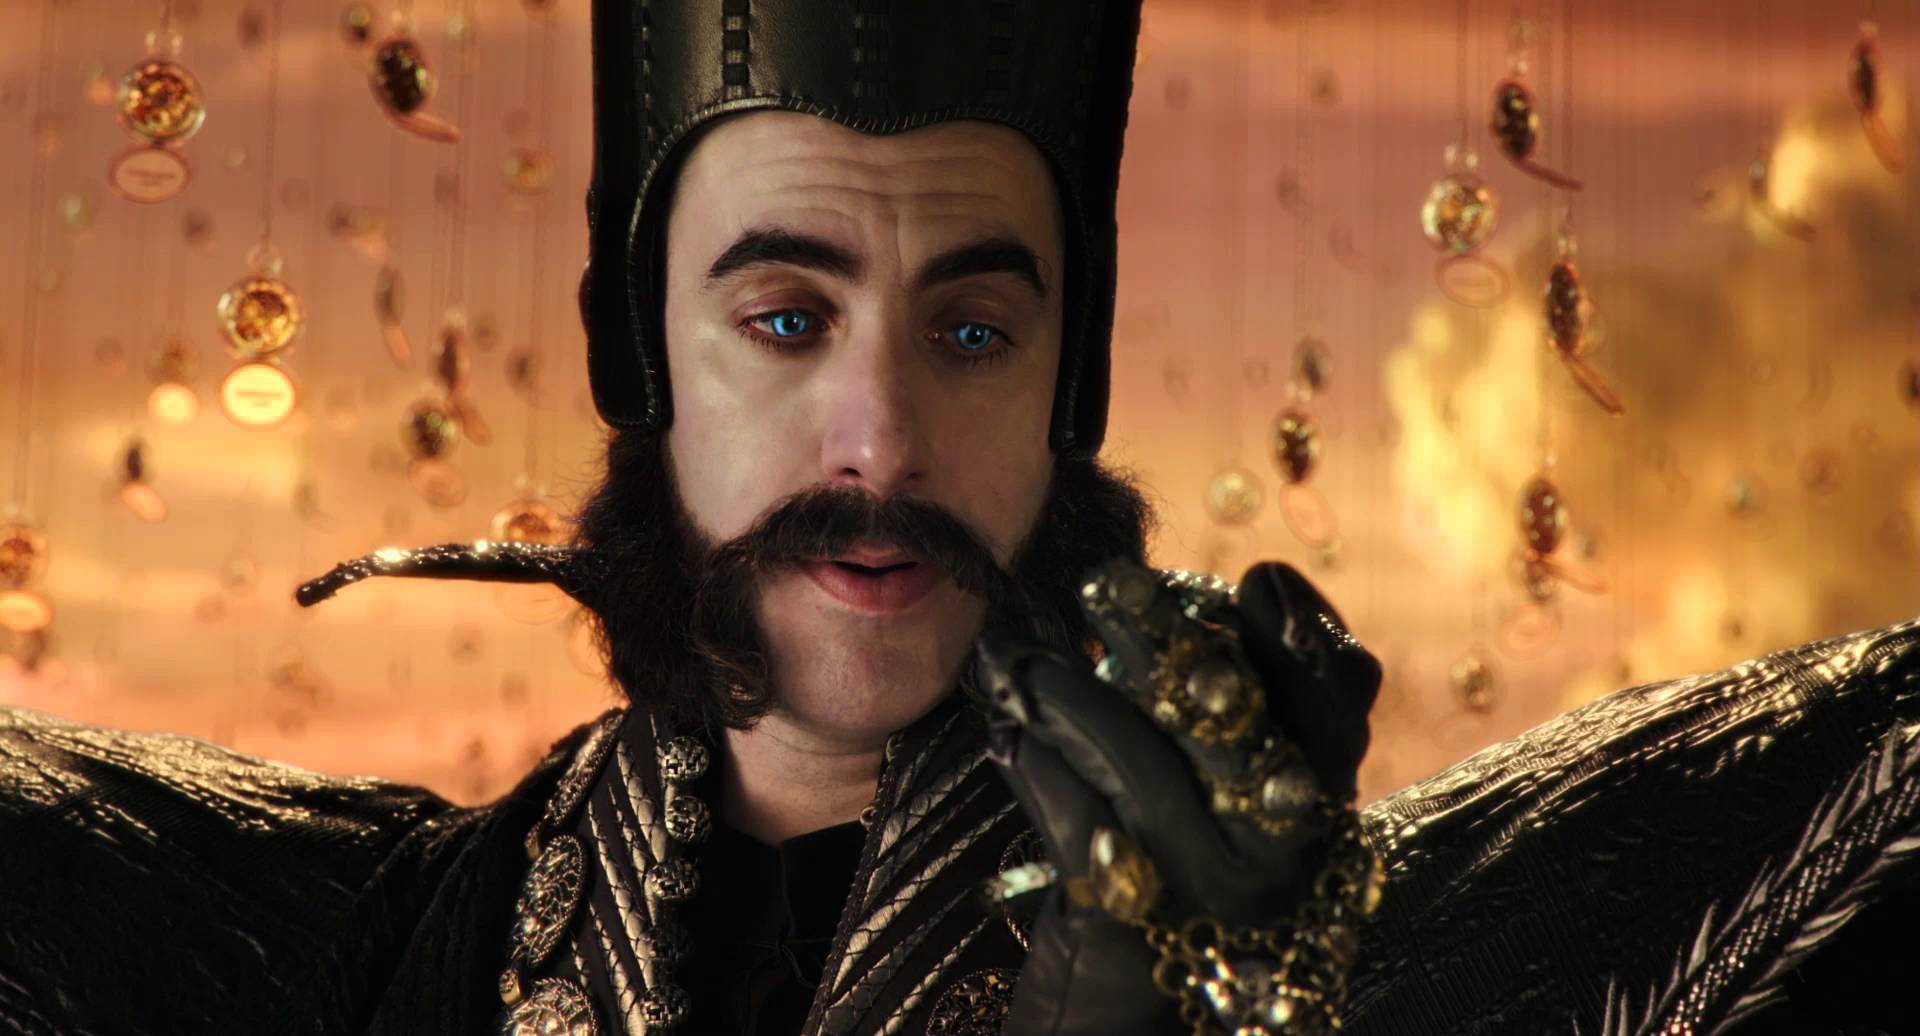 Alice Through The Looking Glass - "Tick Tock" Clip